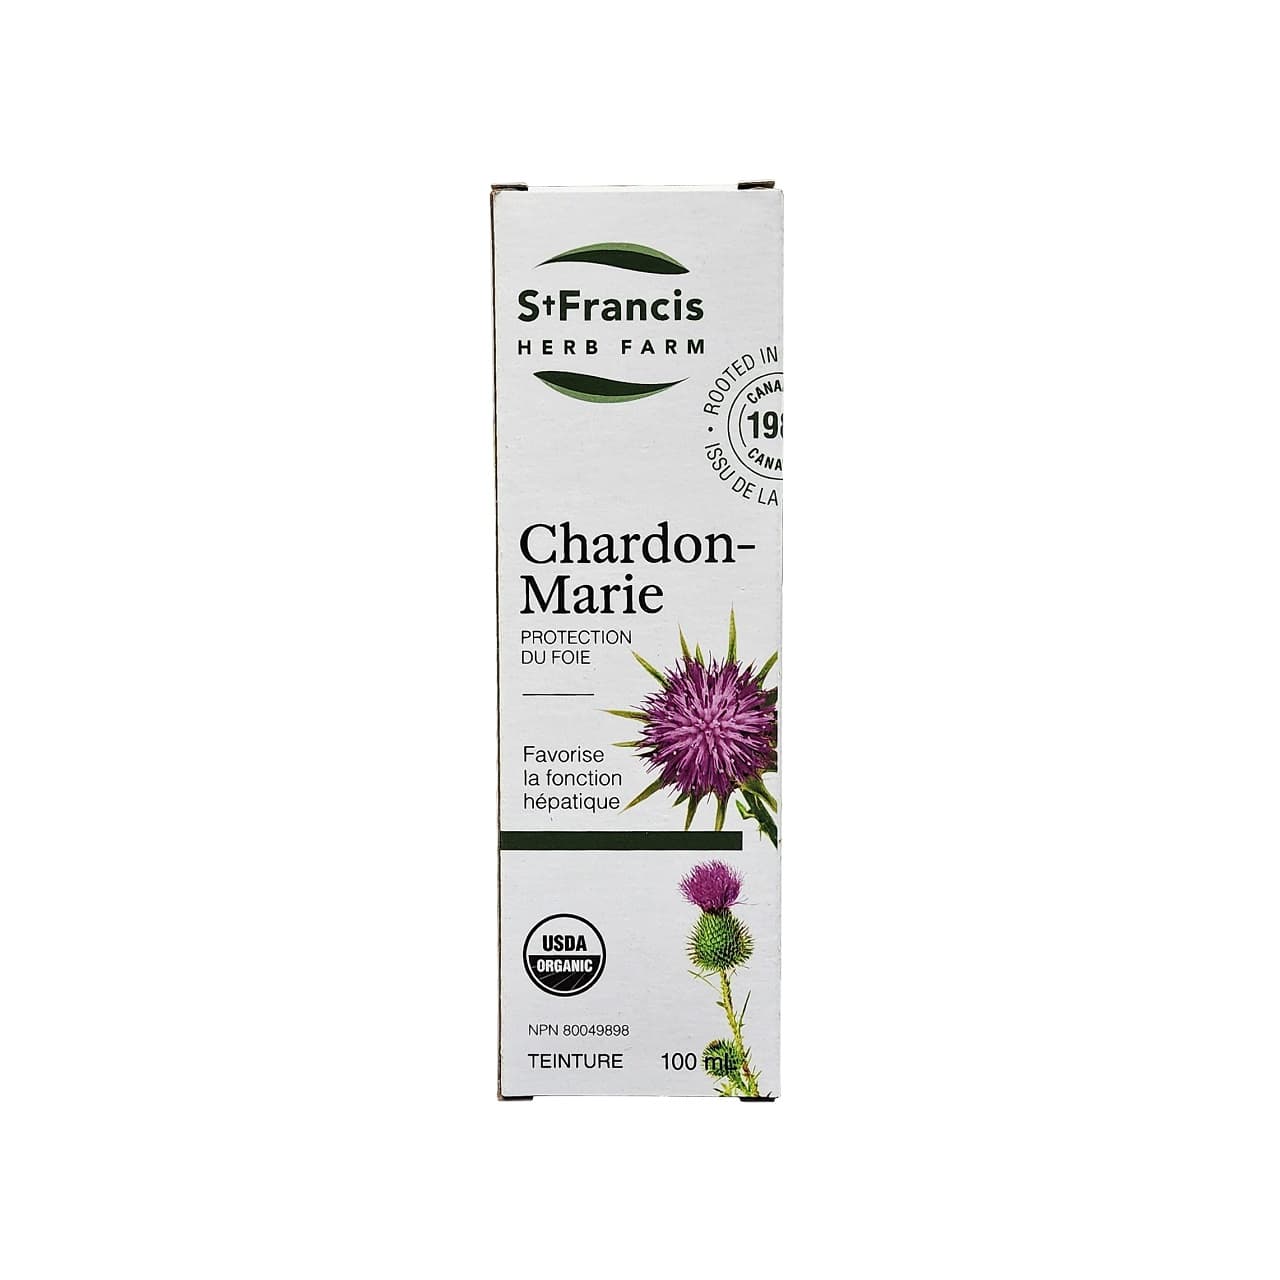 Product label for St. Francis Milk Thistle Tincture (100 mL) in French